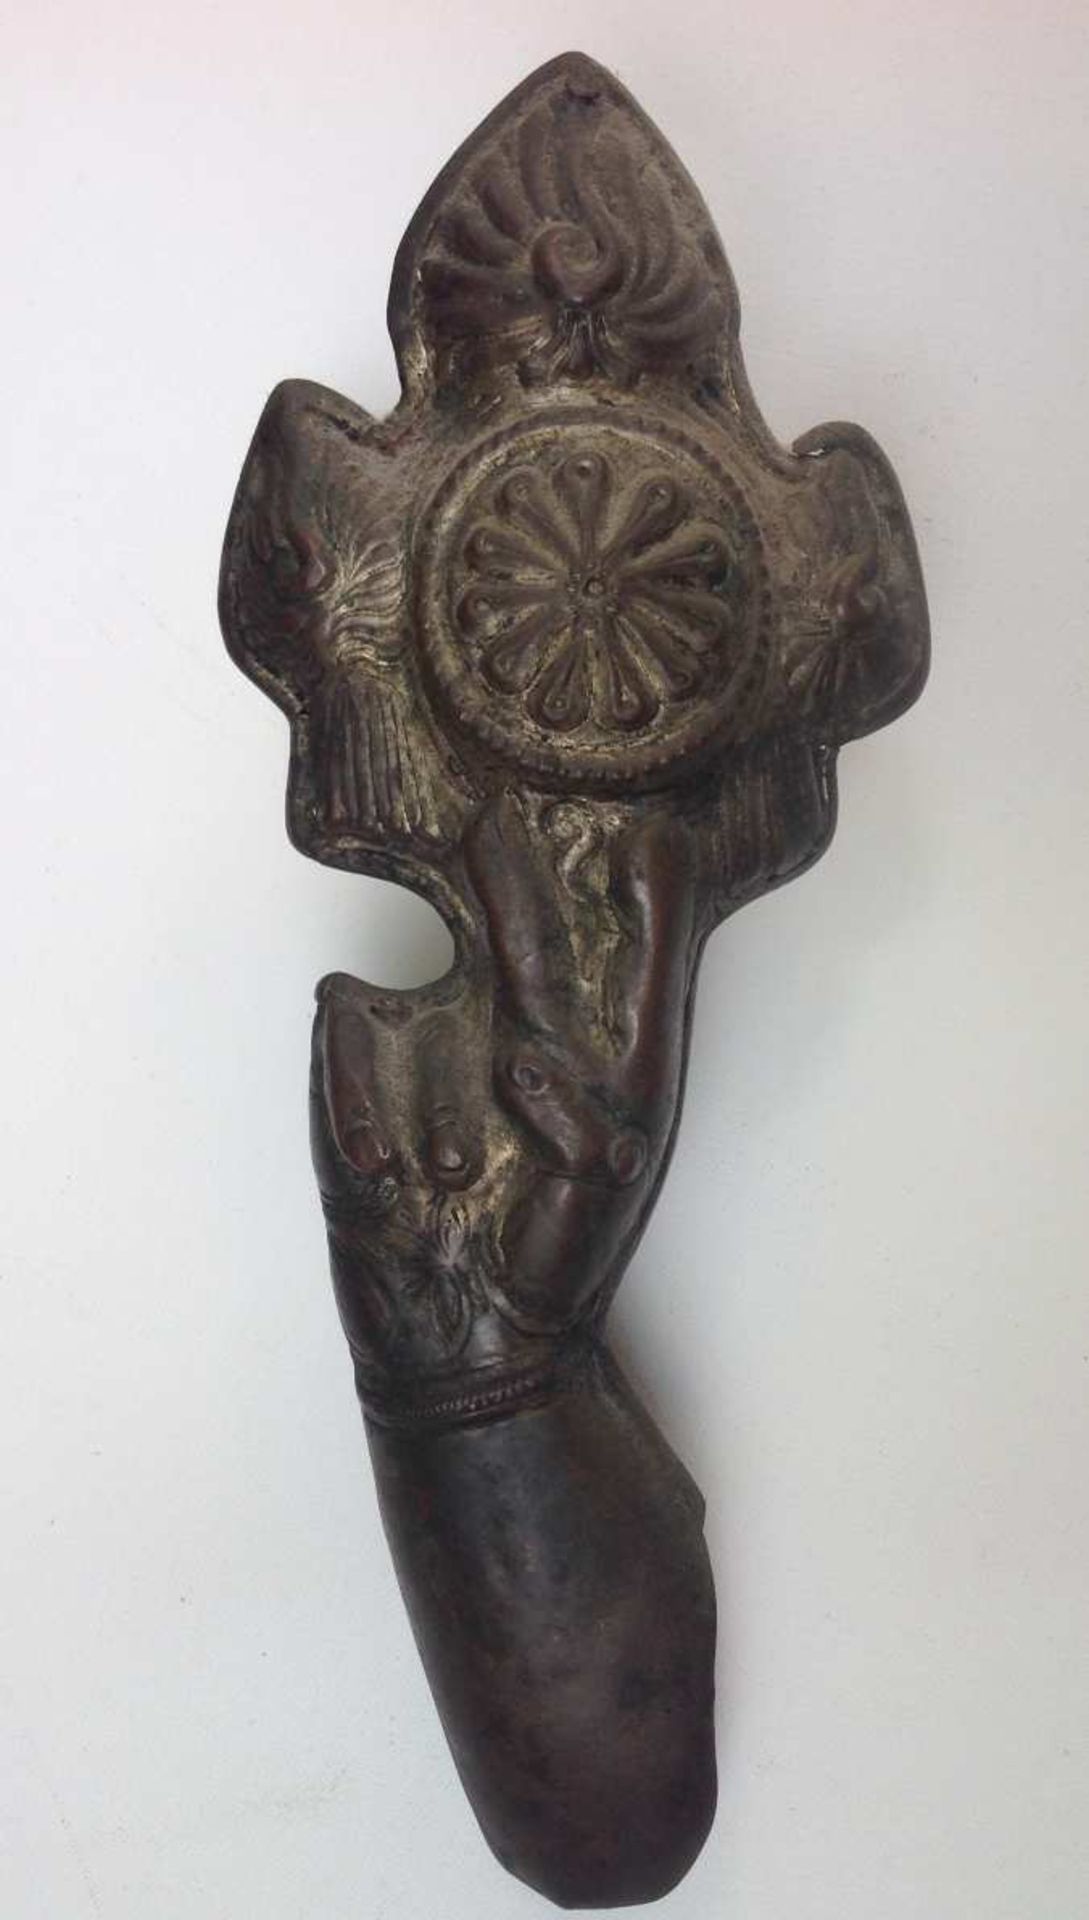 South India, 18th/19th century, Rare hand of Shiva in bronze holding the chakra,